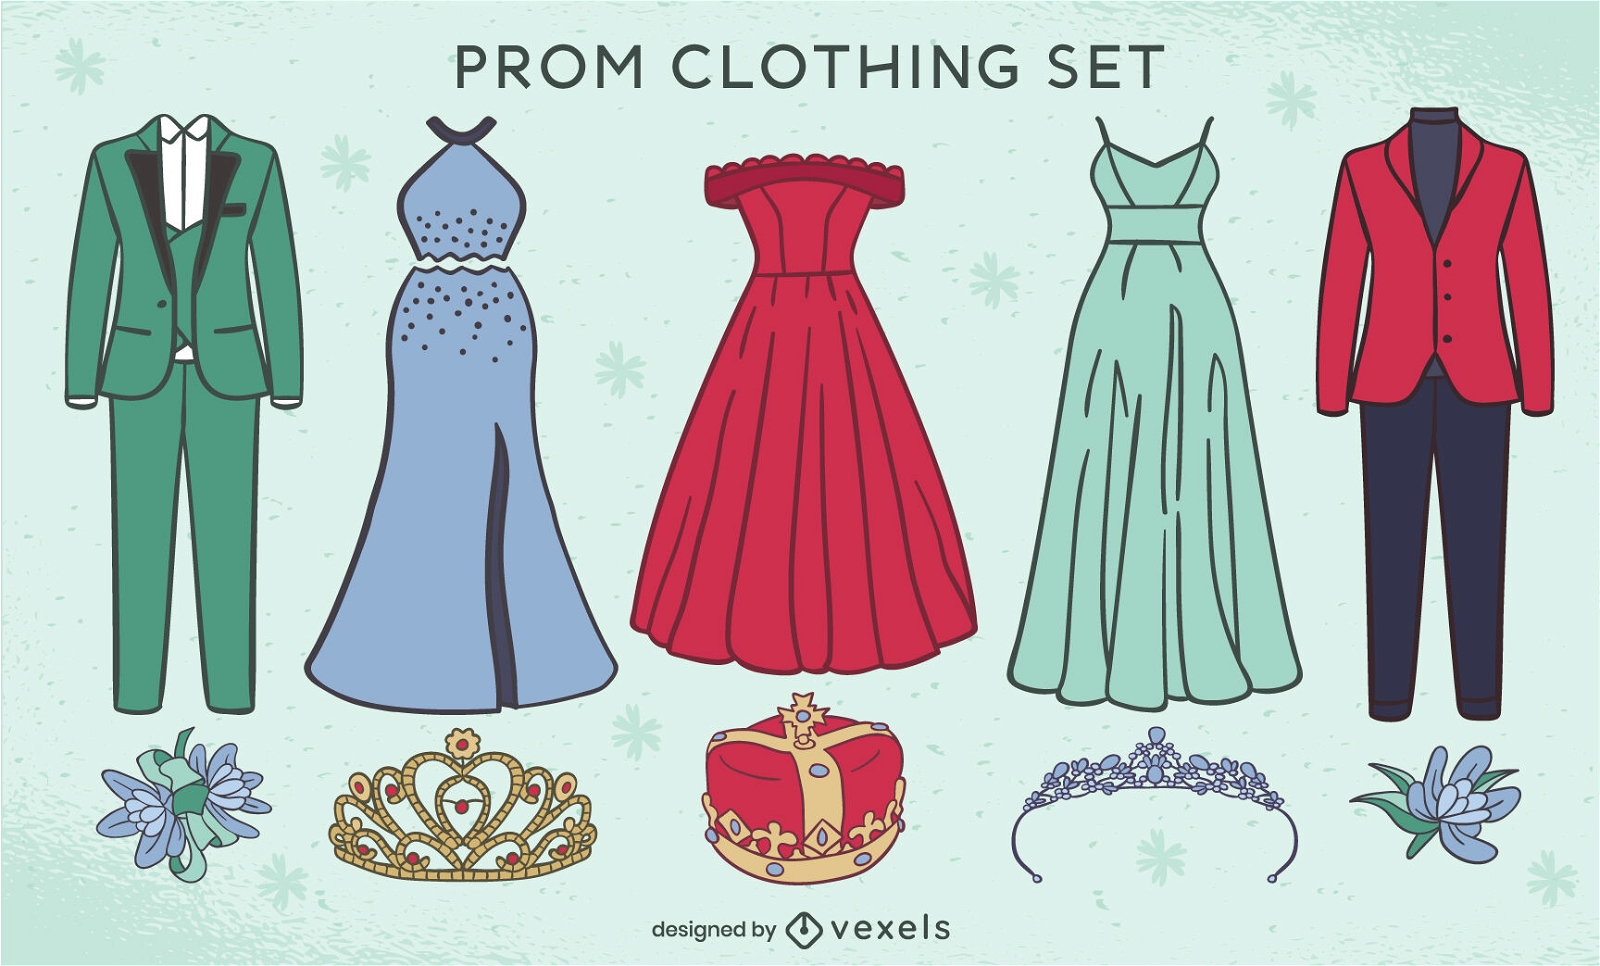 https://images.vexels.com/content/260169/preview/prom-formal-party-clothing-attire-set-35c683.png